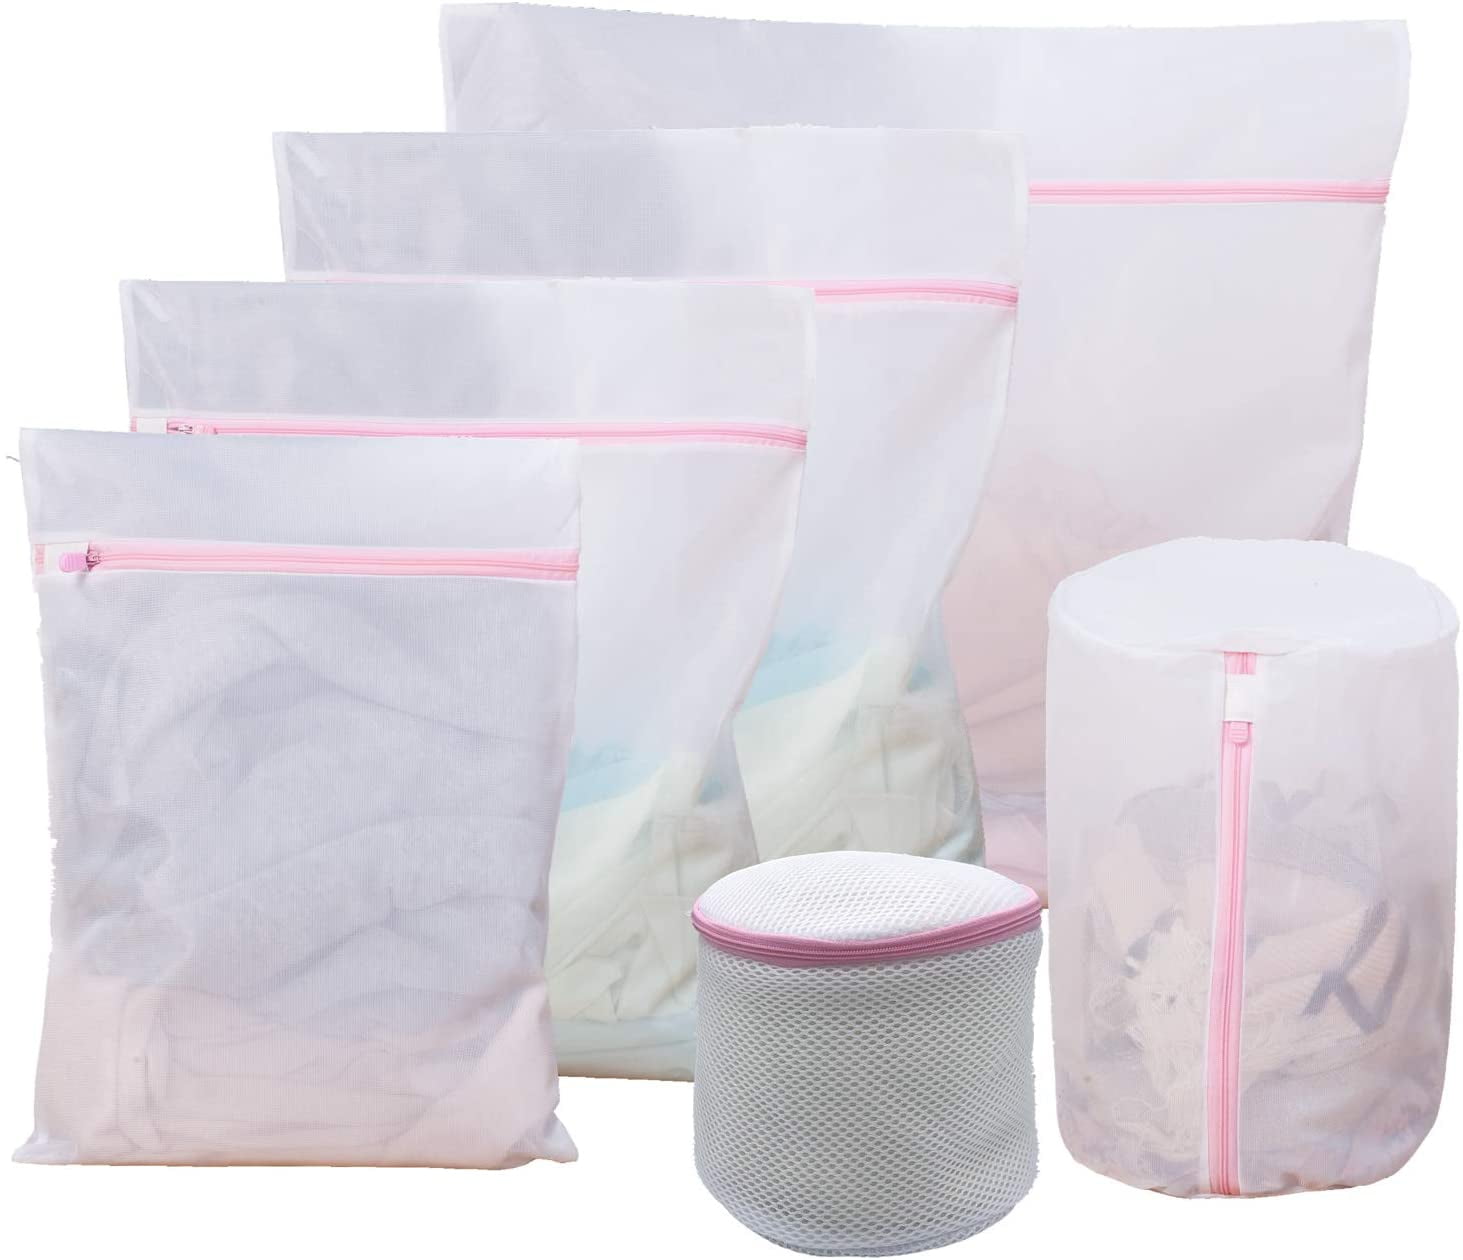 Bags Breathable Wash With Colored Zippers Set Of 5 Mesh Laundry Bag Delicates 